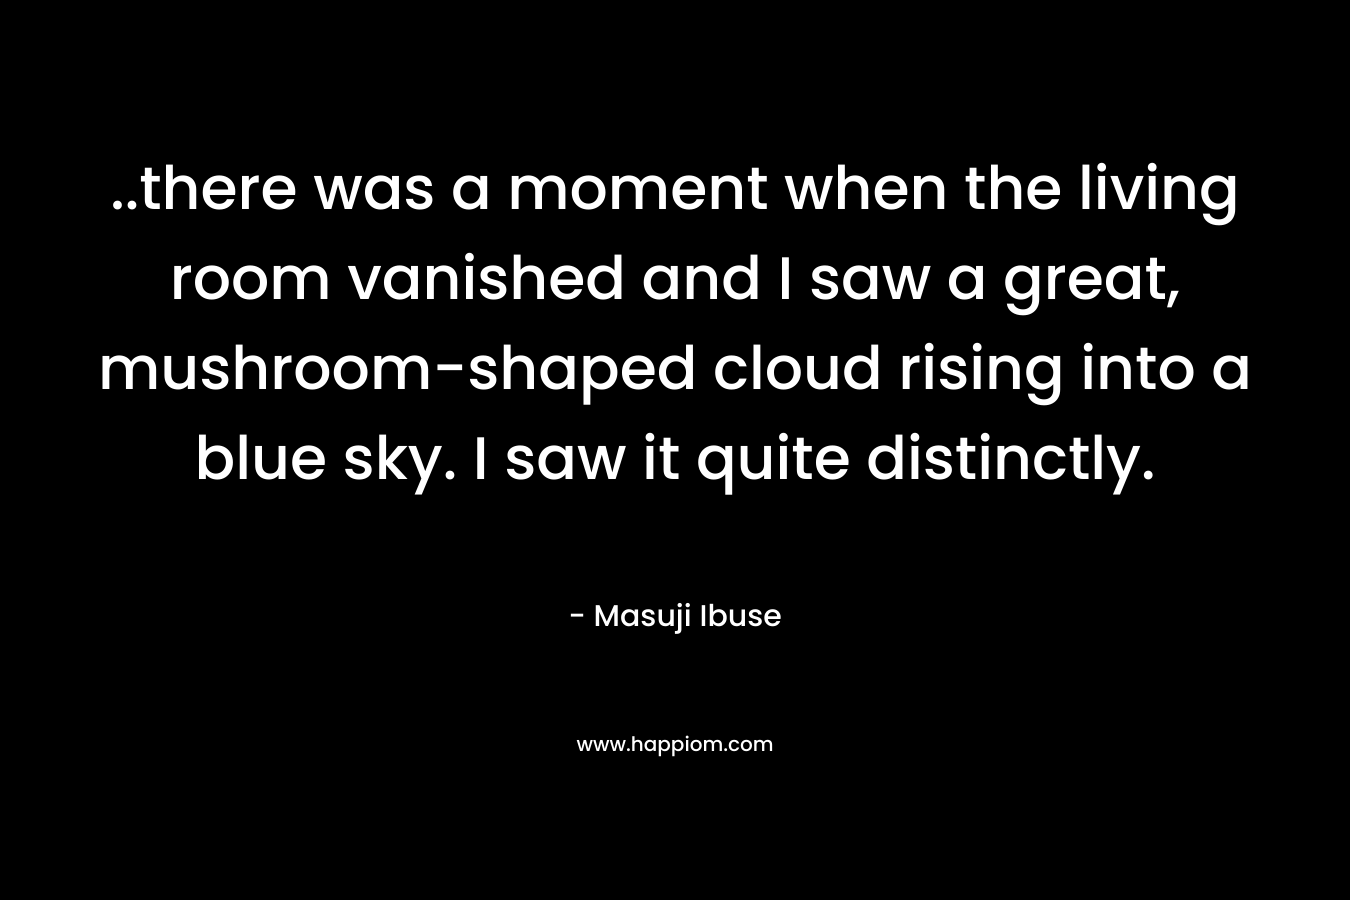 ..there was a moment when the living room vanished and I saw a great, mushroom-shaped cloud rising into a blue sky. I saw it quite distinctly. – Masuji Ibuse